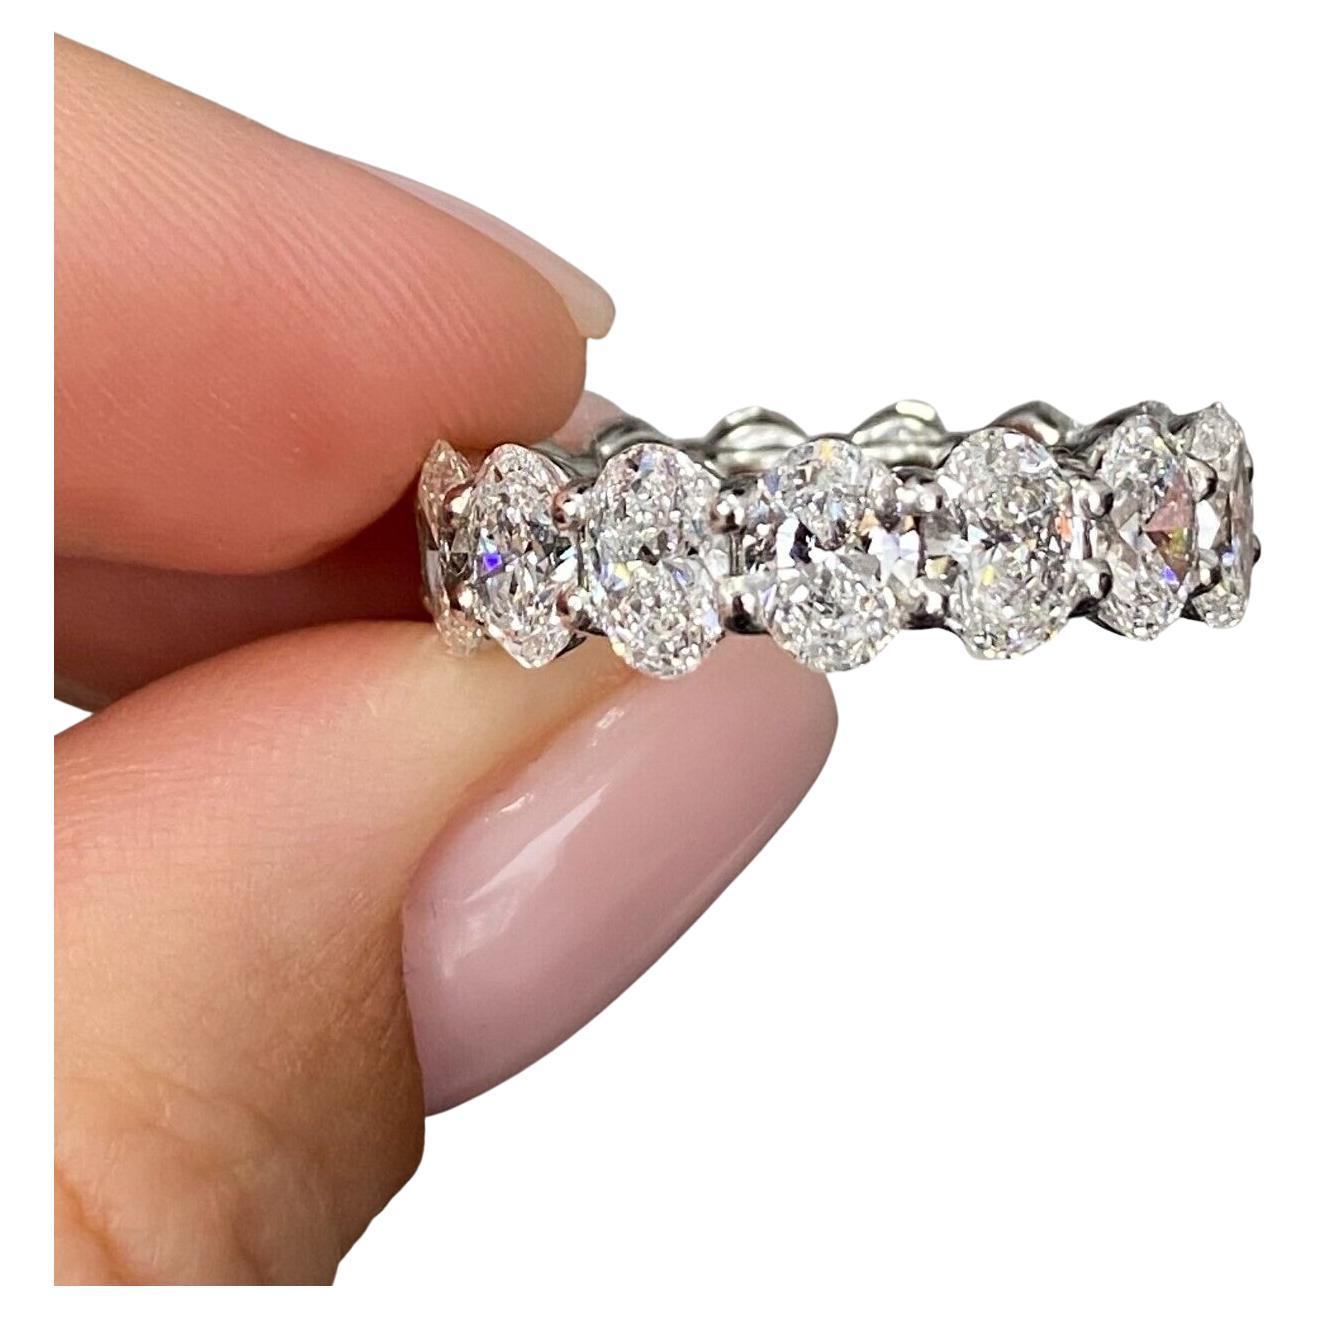 Platinum 6.08 Cts, Oval Diamond Eternity Ring Set w/ Shared Prongs High Quality For Sale